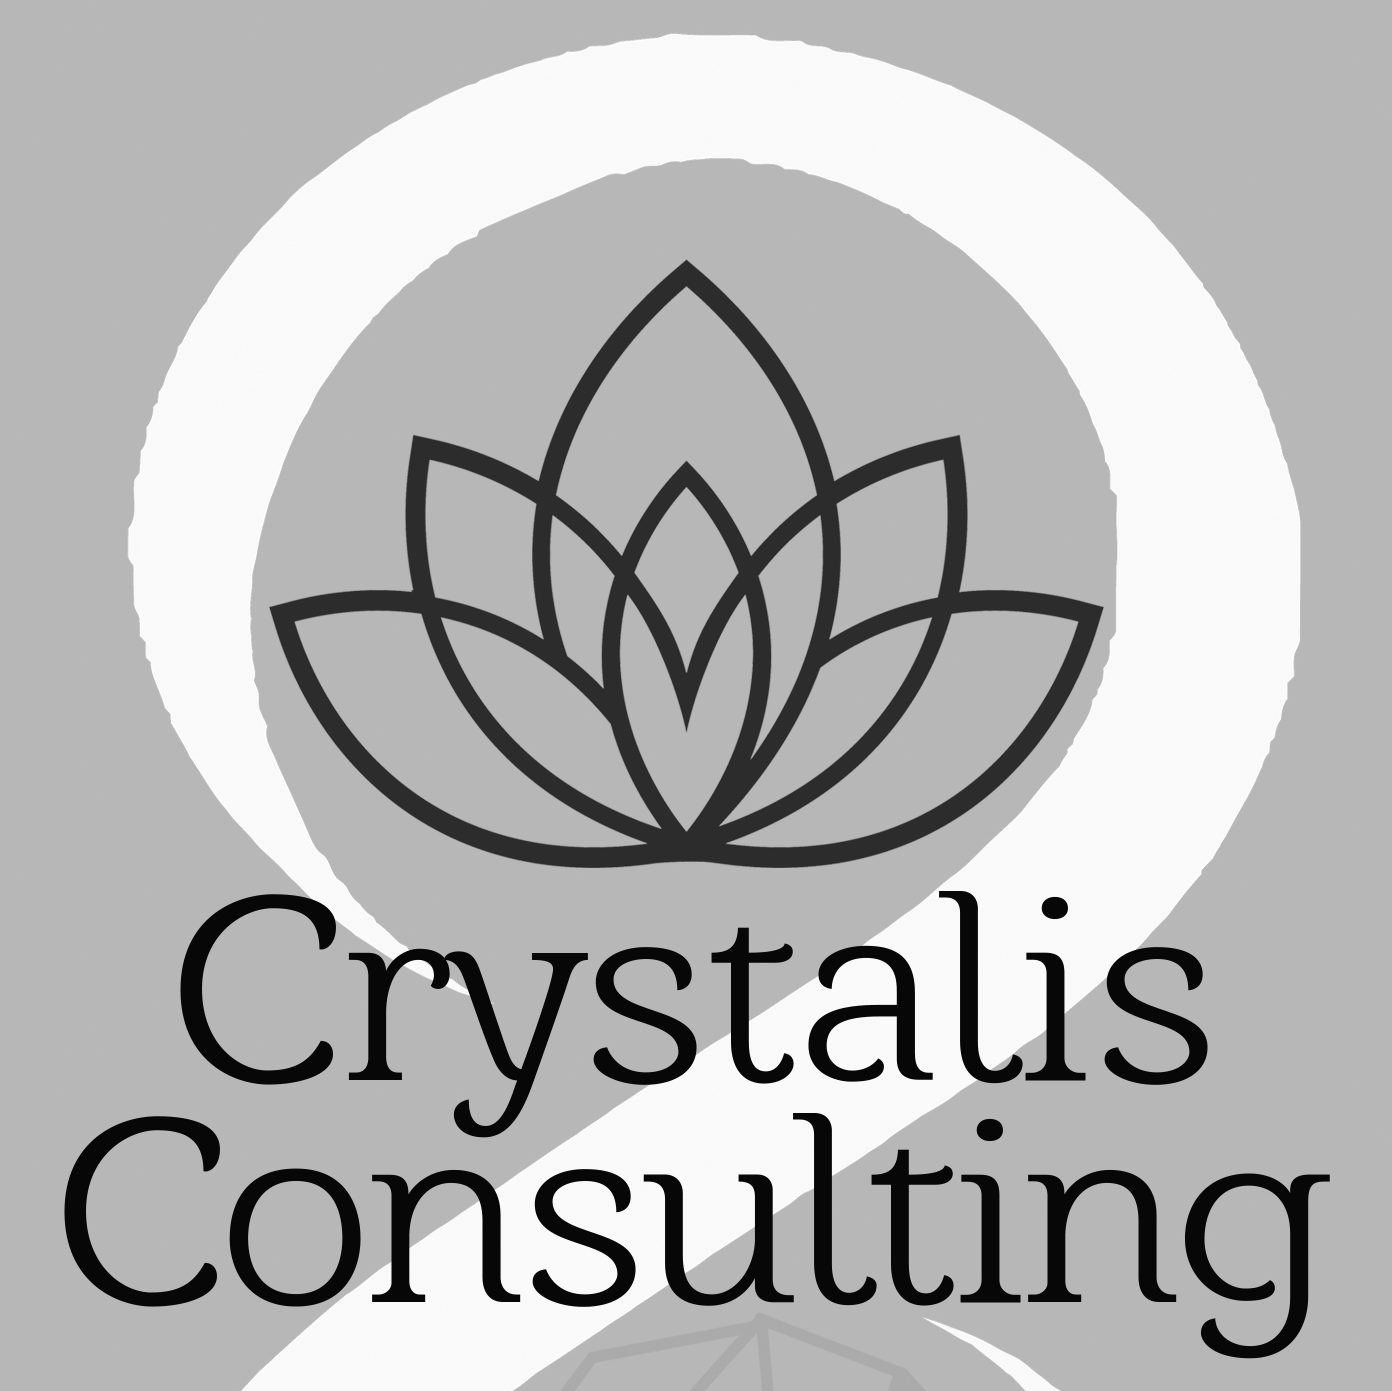 Crystalis Consulting Agency